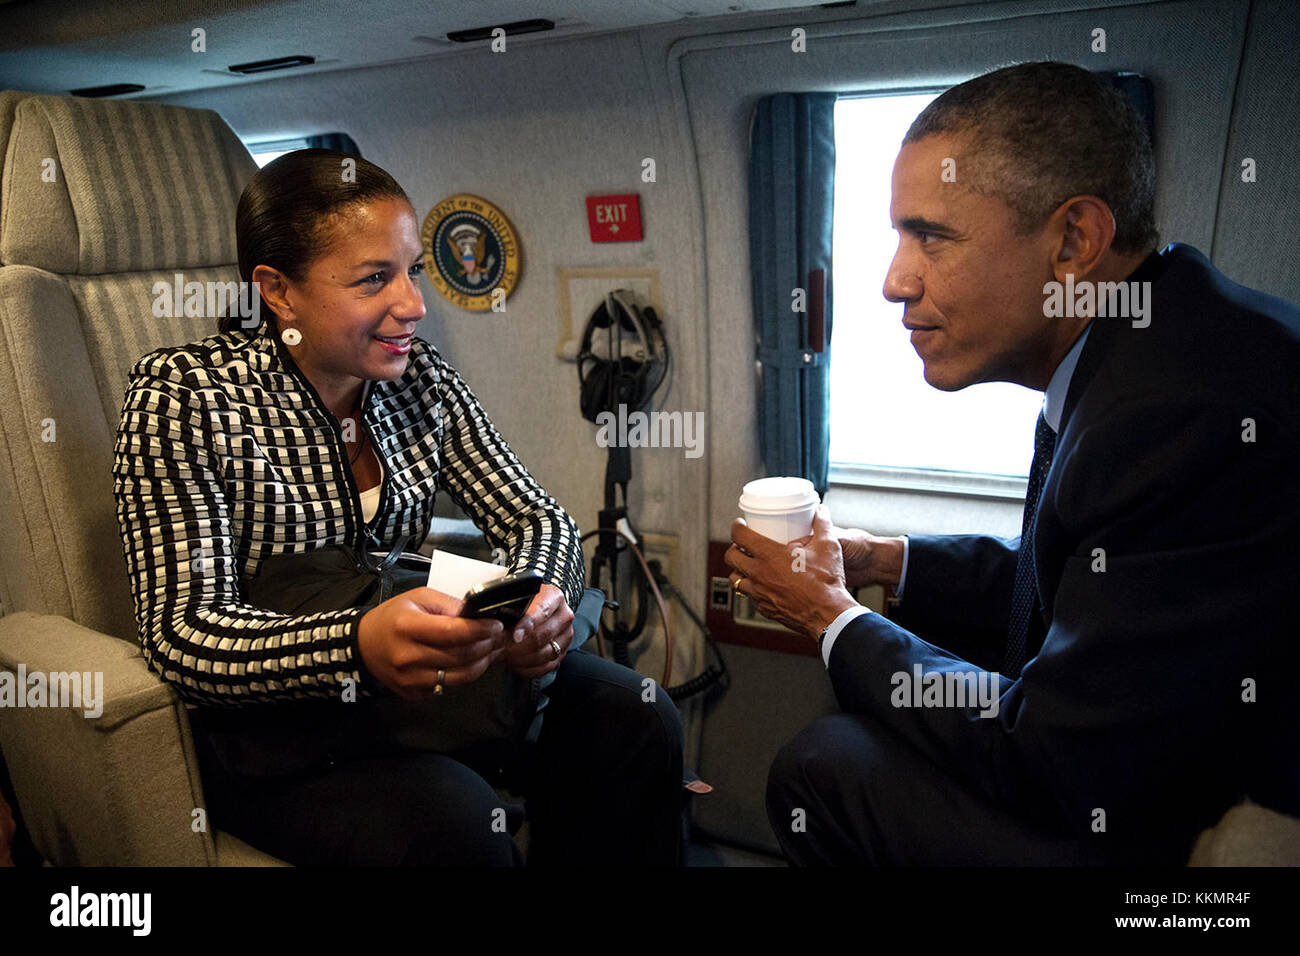 President Barack Obama talks with National Security Advisor Susan E. Rice aboard Marine One en route to Stonehenge in Wiltshire, England following the NATO Summit in Wales, Sept. 5, 2014. Stock Photo